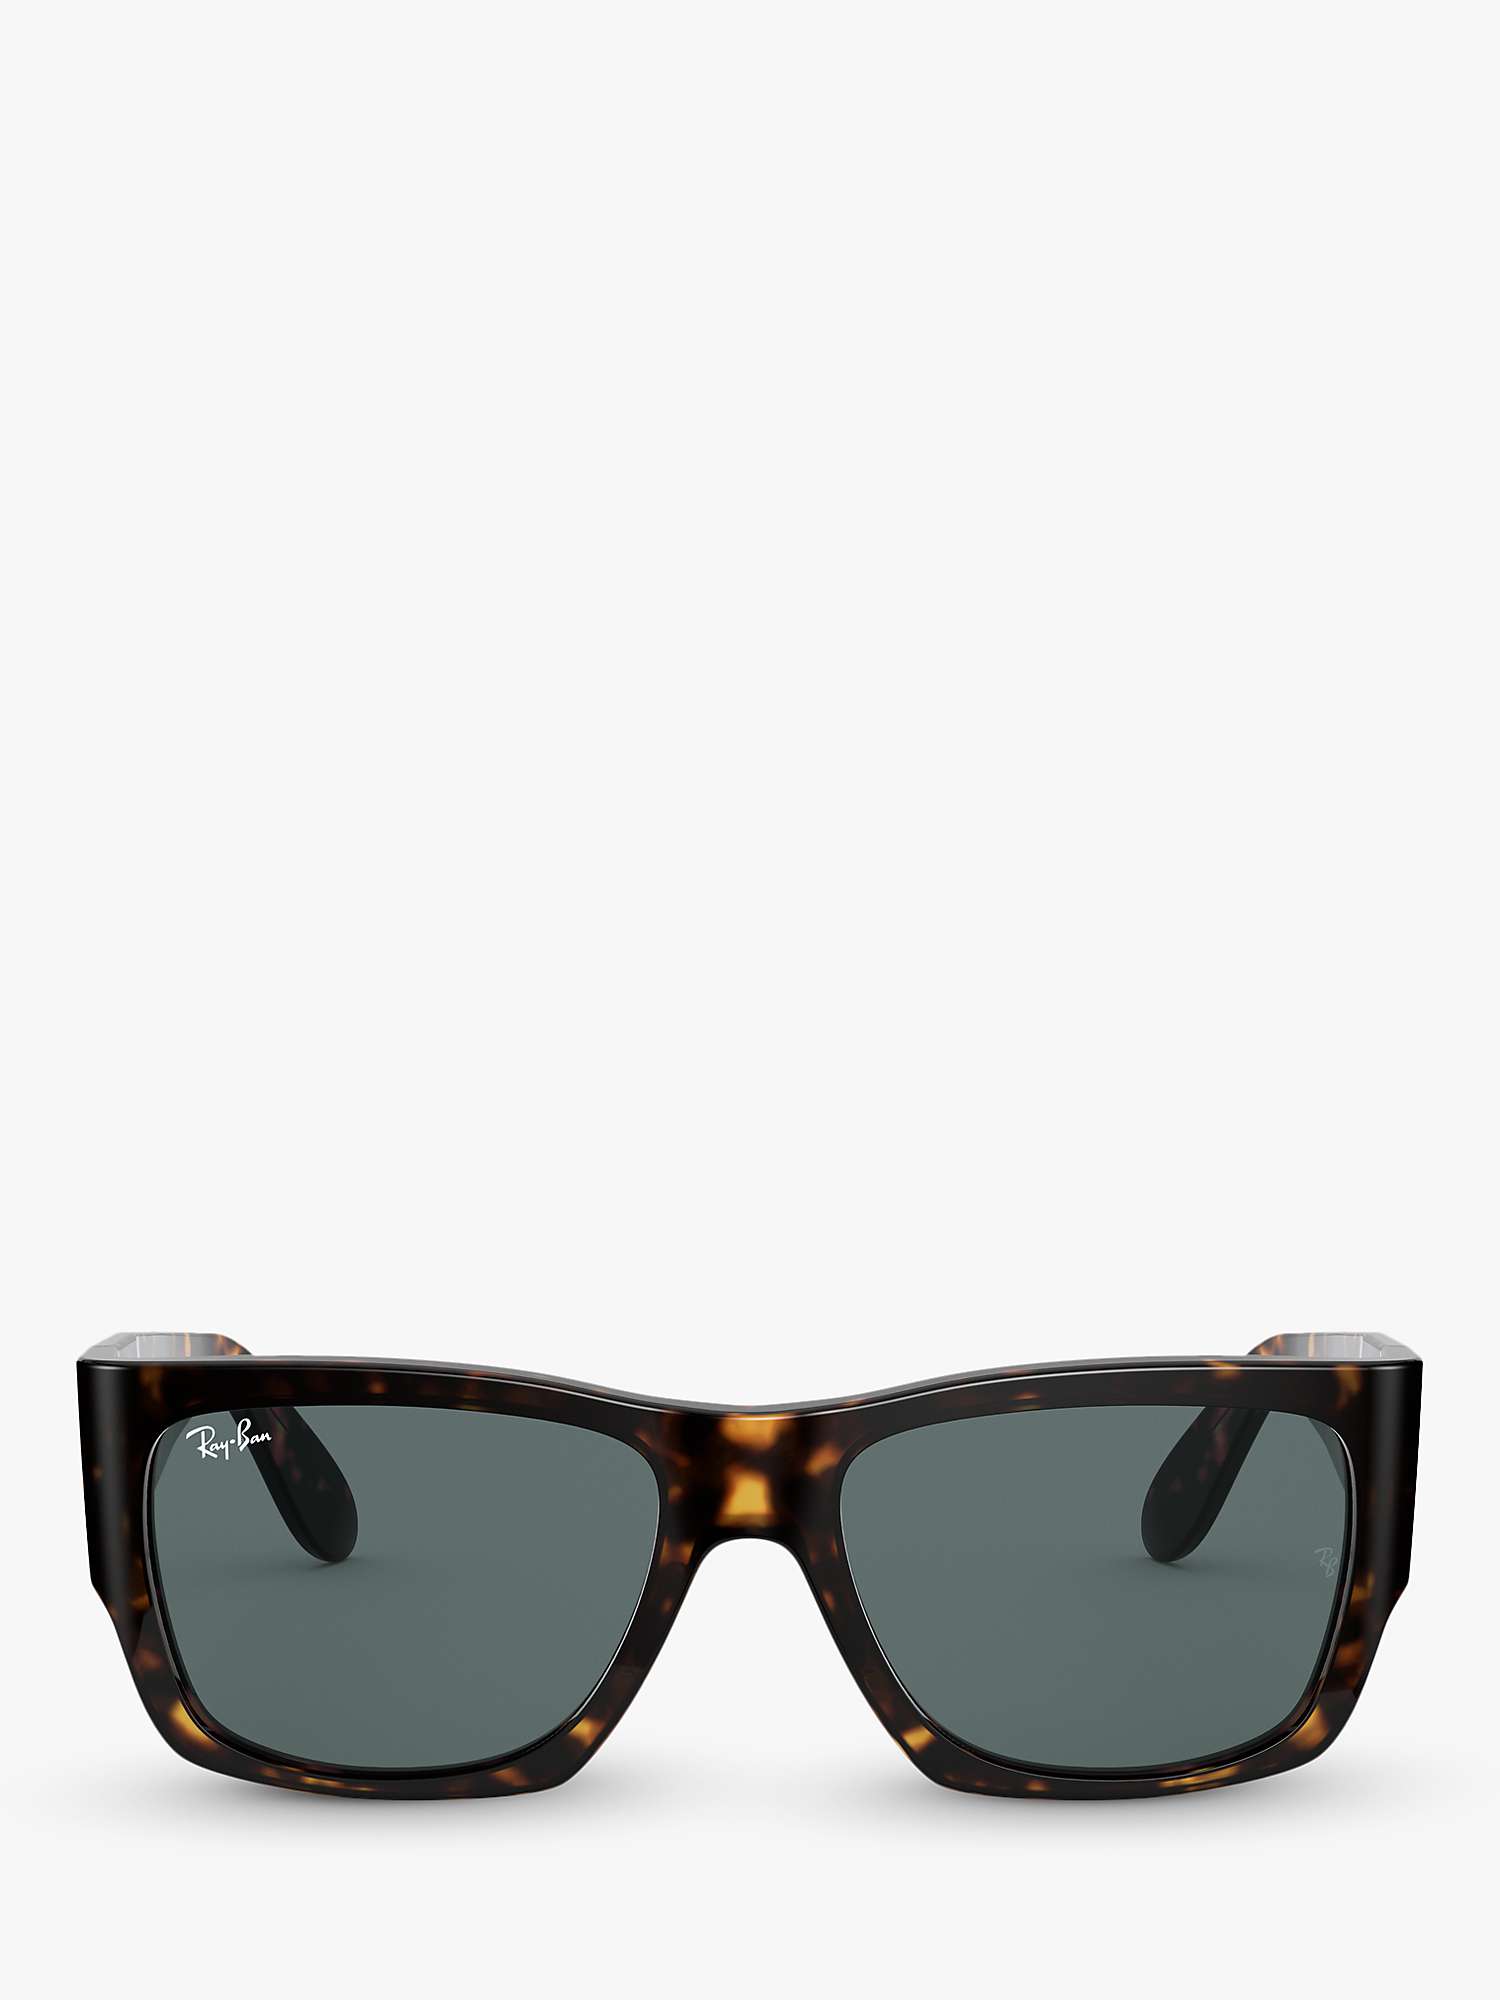 Buy Ray-Ban RB2187 Unisex Square Sunglasses Online at johnlewis.com